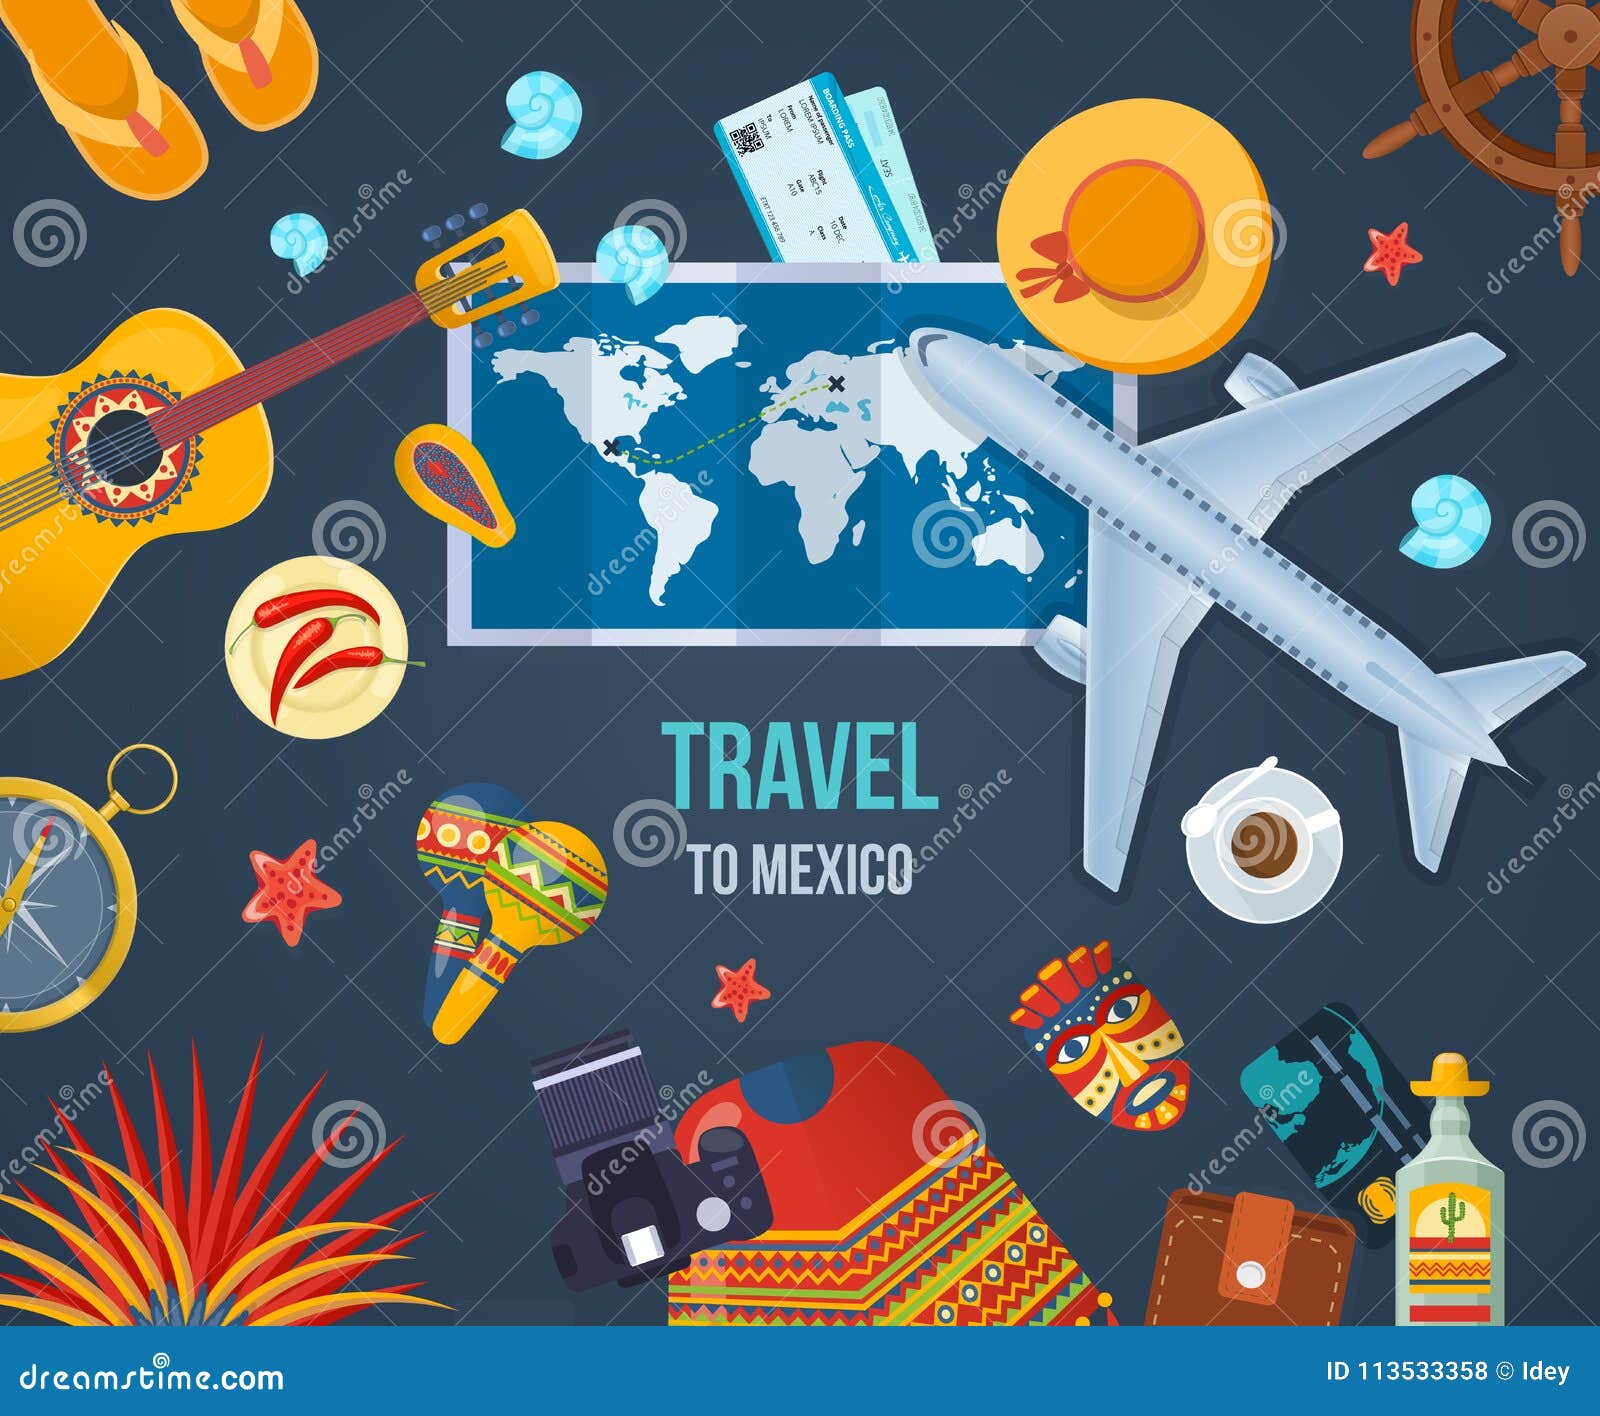 travel to mexico by plane